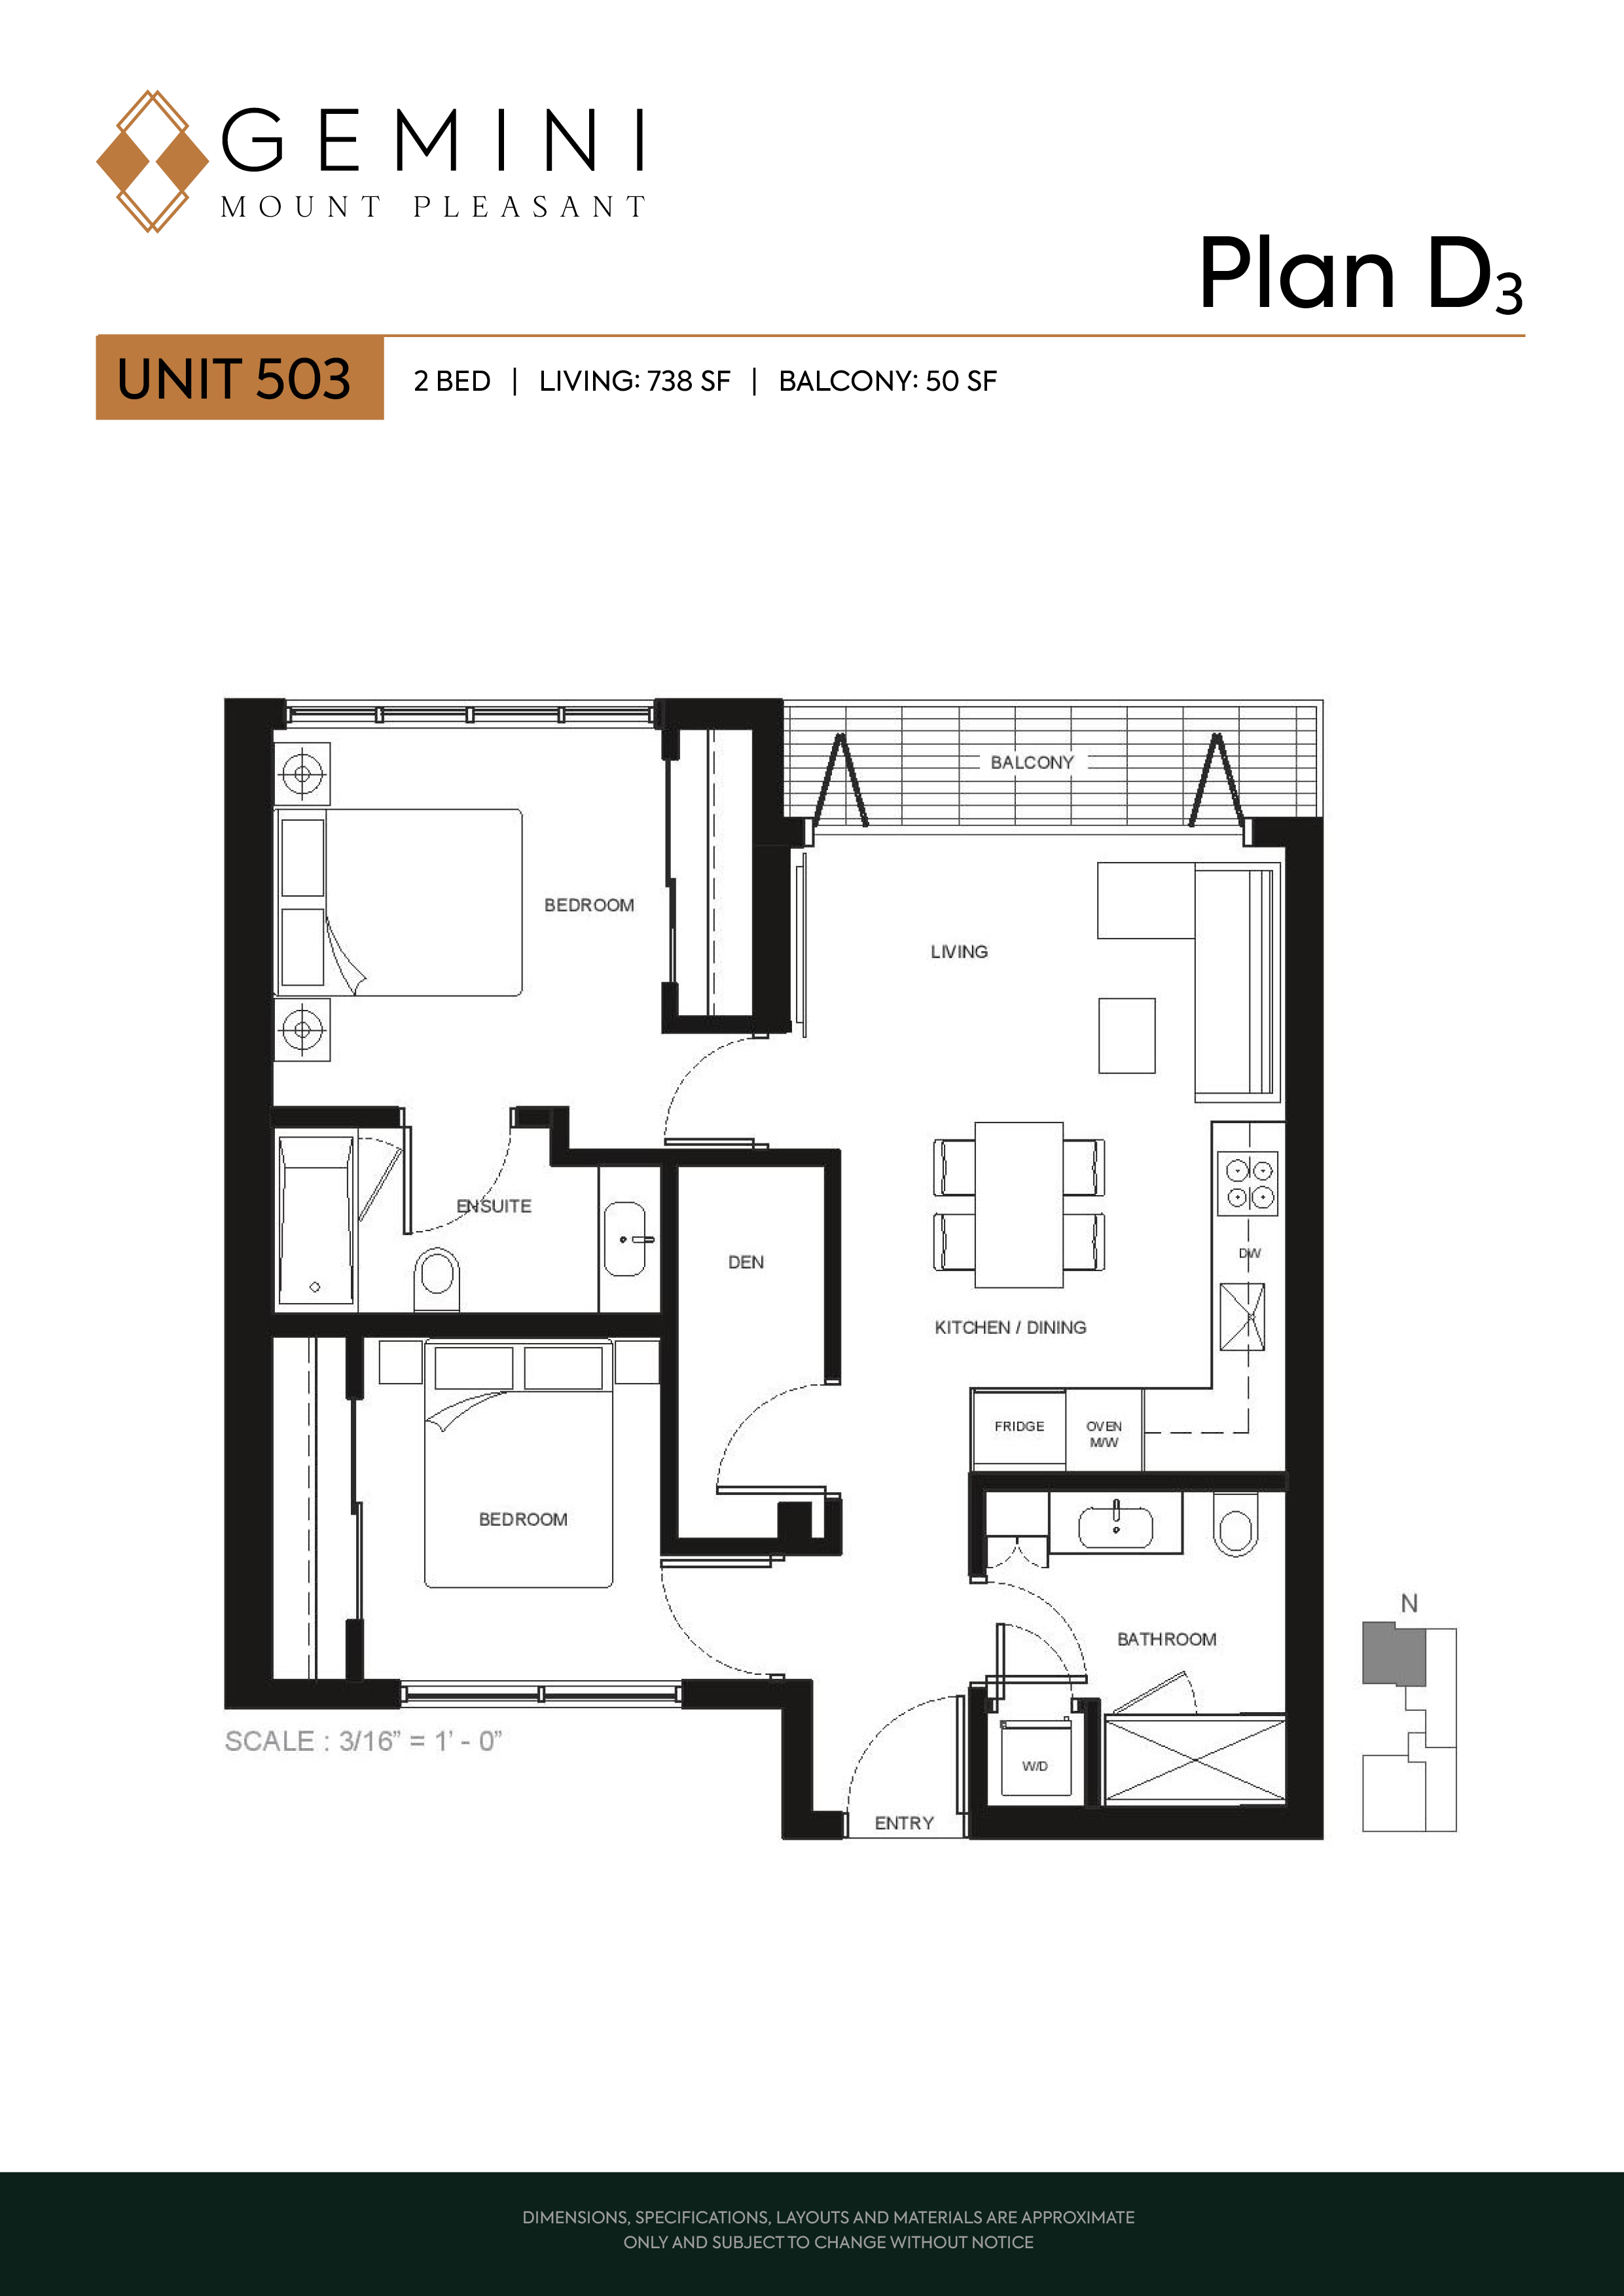 Plan D3 Floor Plan of Gemini Mount Pleasant Condos with undefined beds